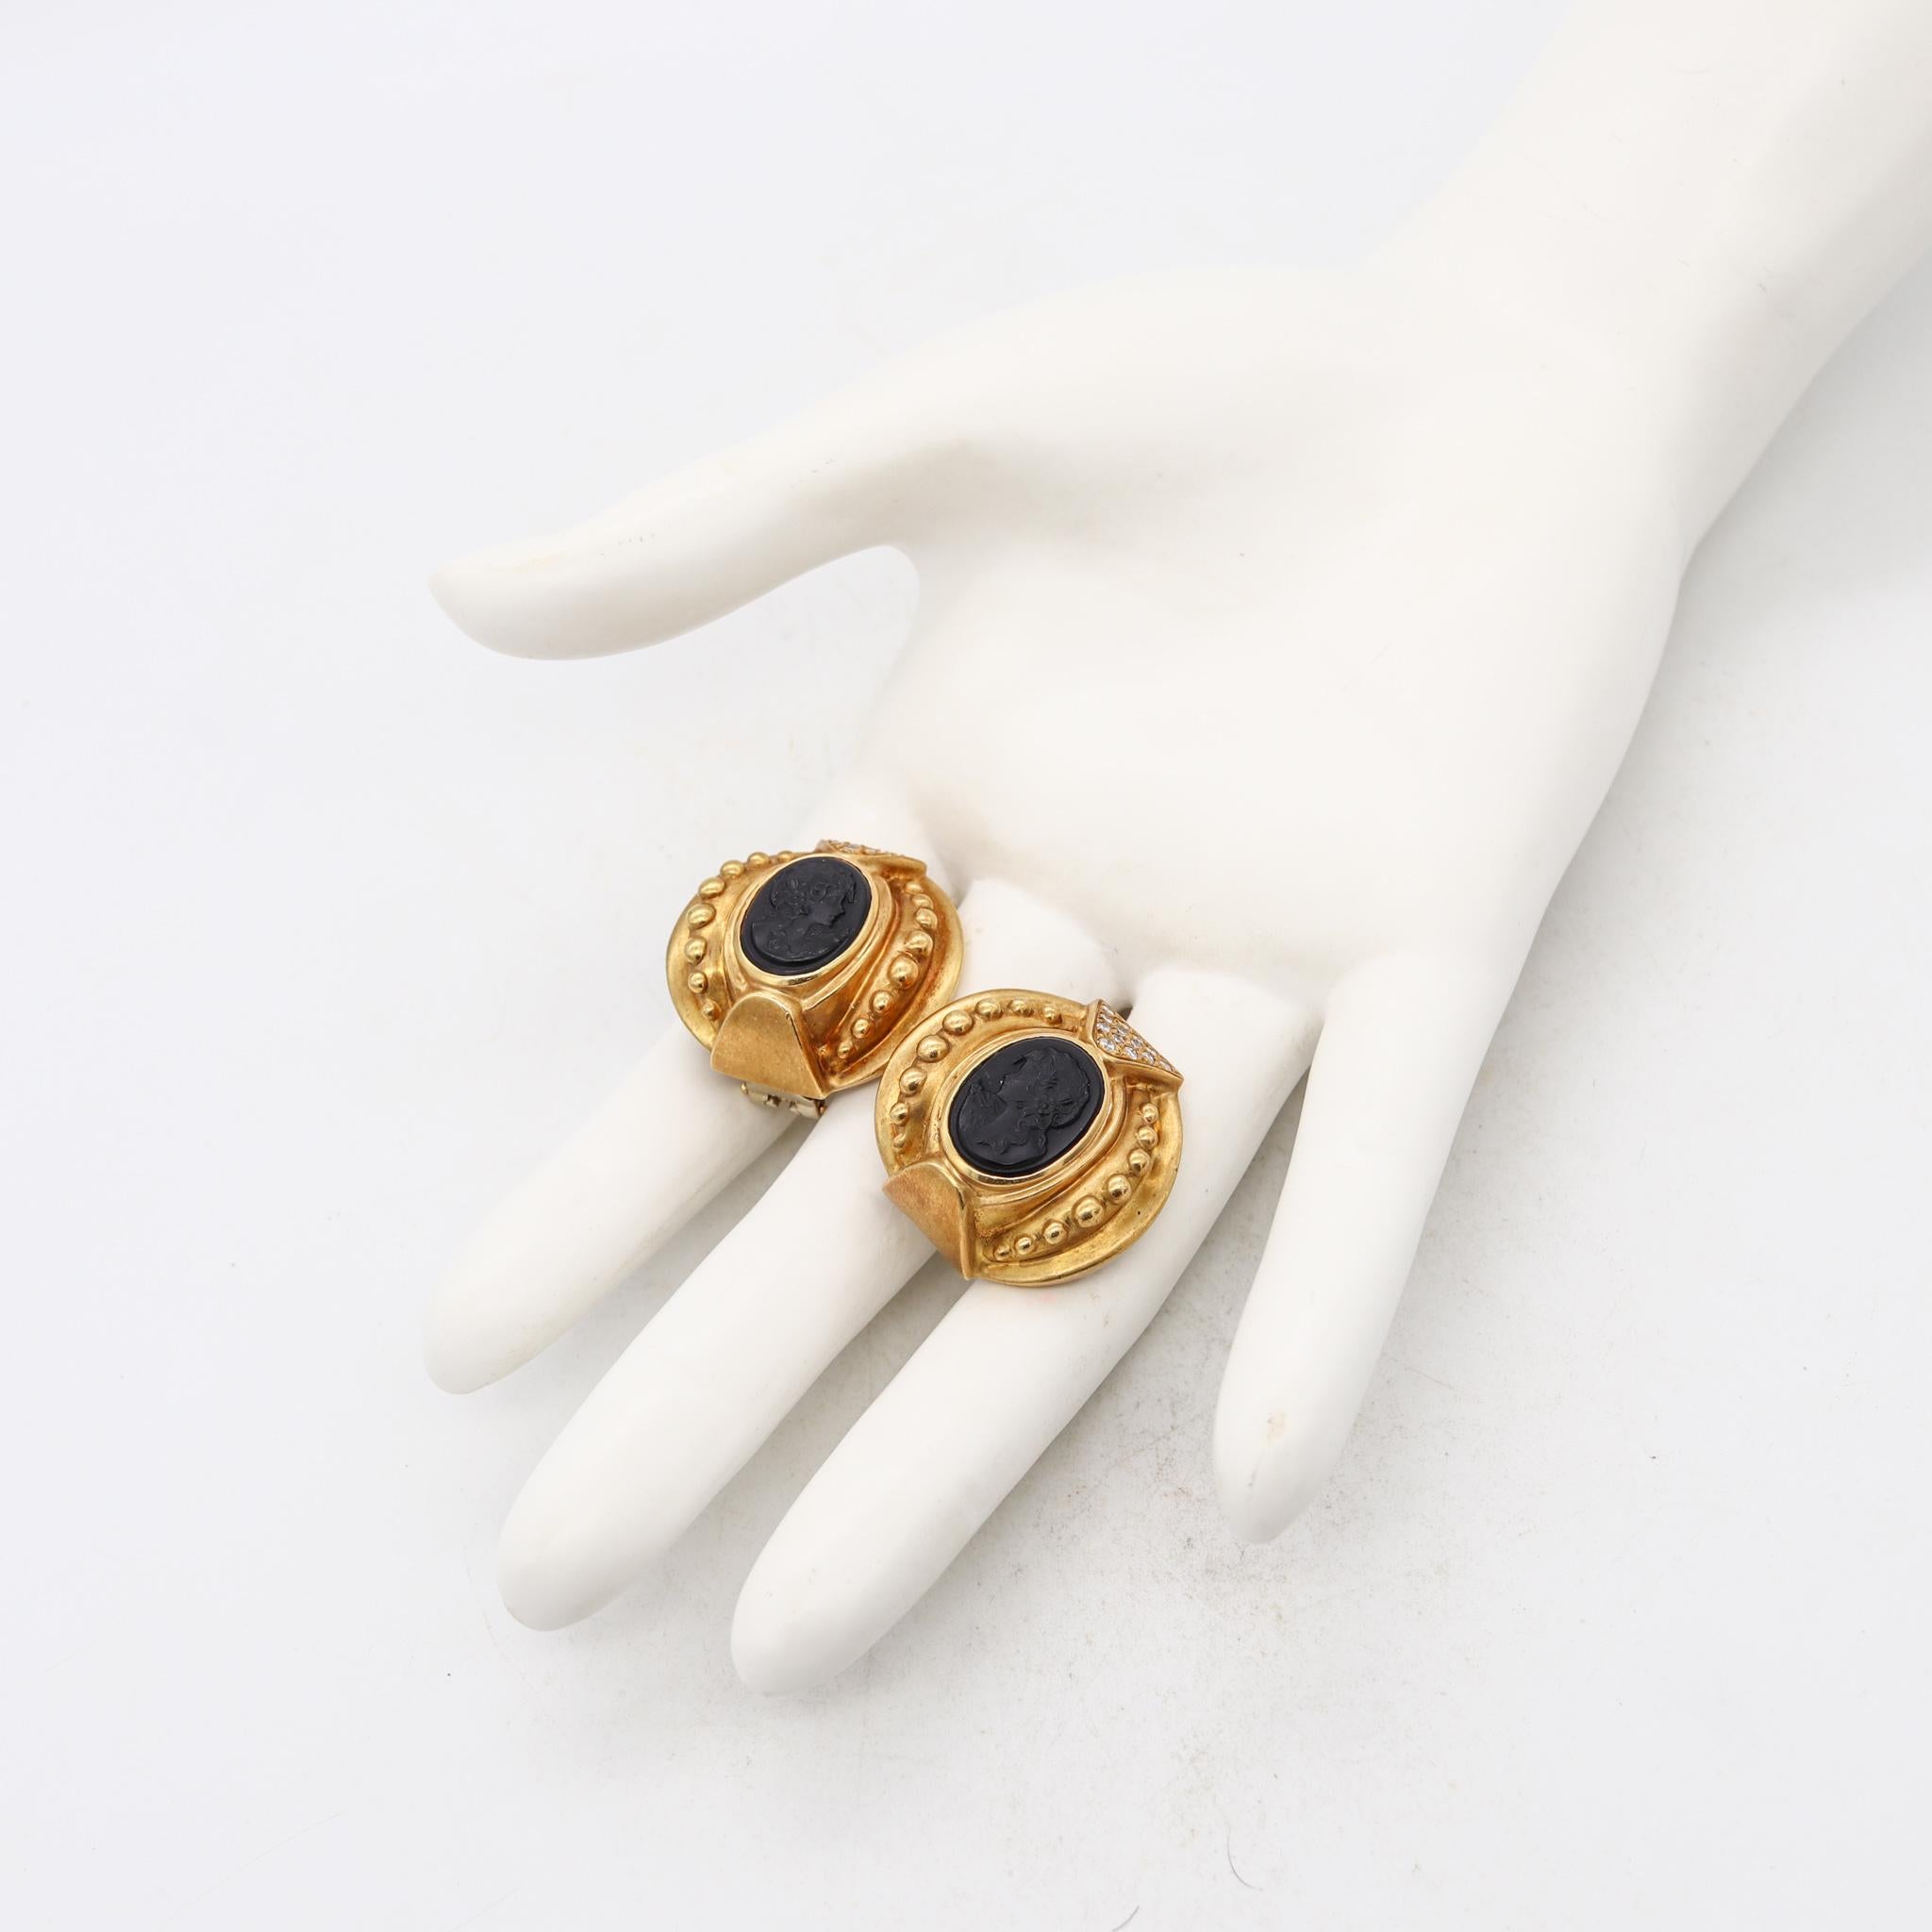 Etruscan Revival earrings.

Gorgeous, oversized and bold pair, crafted with Etruscan-Roman revival patterns in solid yellow gold of 18 karats, with satin finish. Suited with posts for pierced ears and a pair of comfortable omega backs for fastening